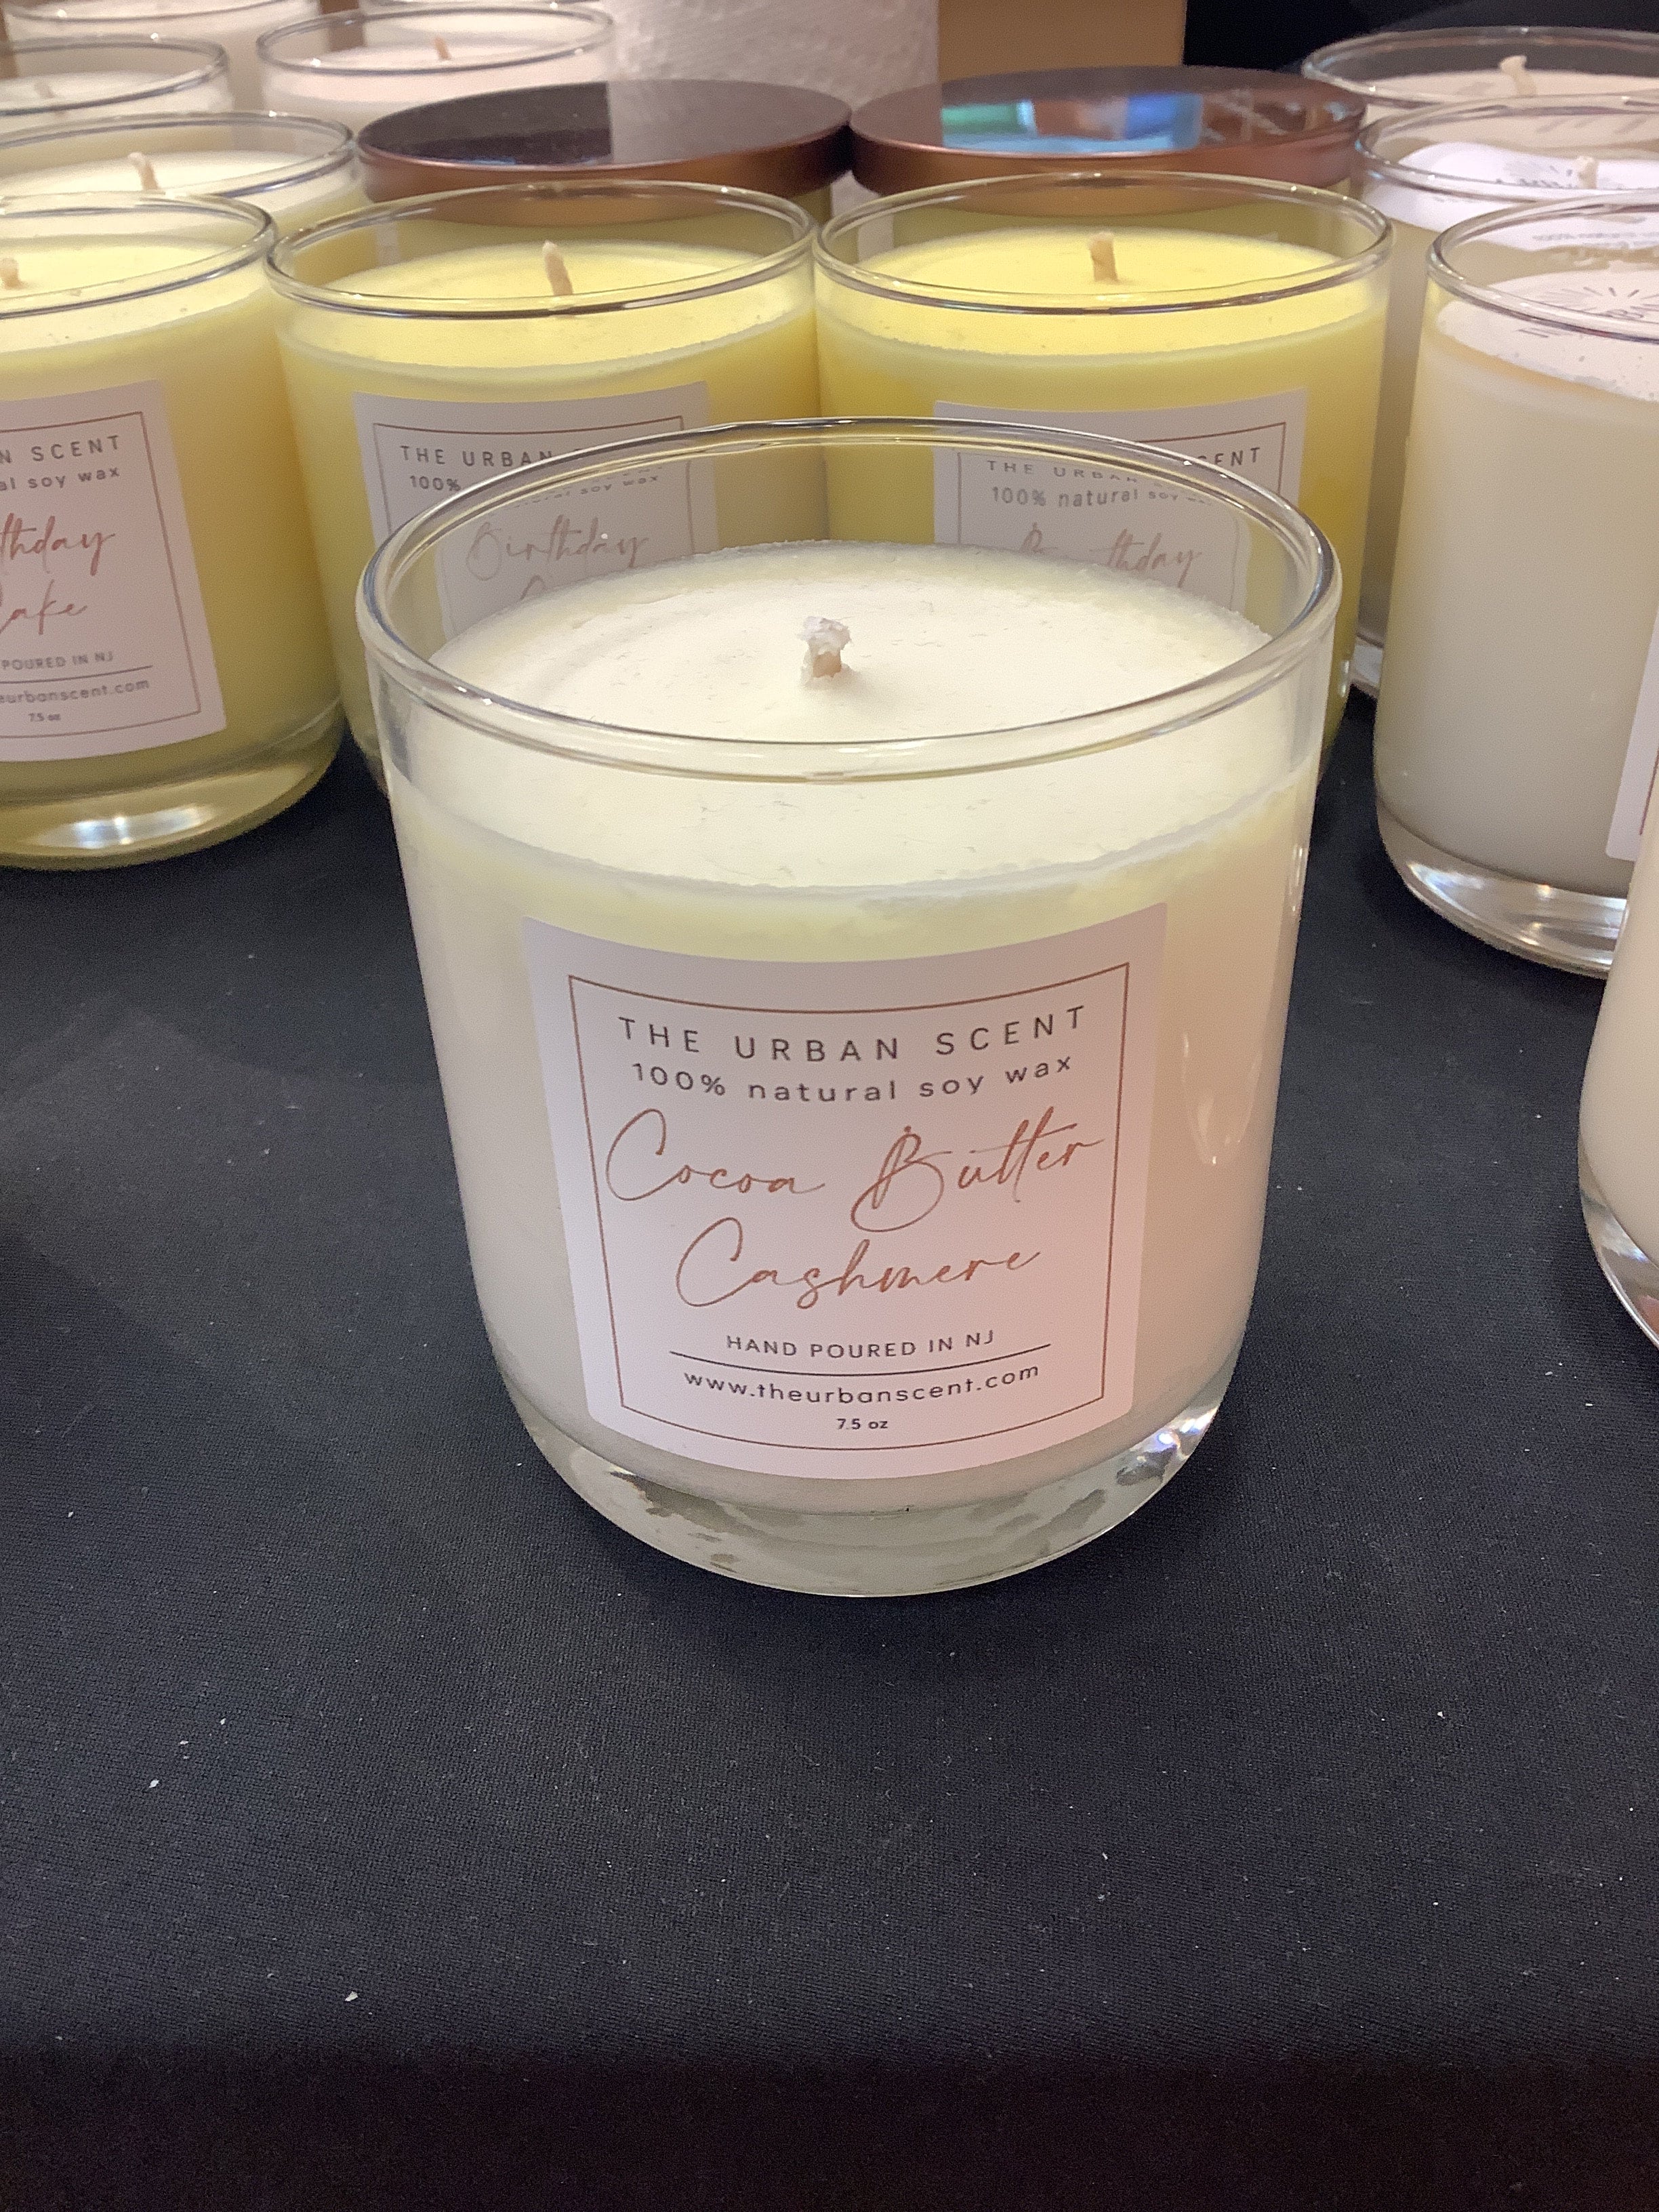 Smiley Cocoa Butter Cashmere Car Freshie – Simply Modern Scents